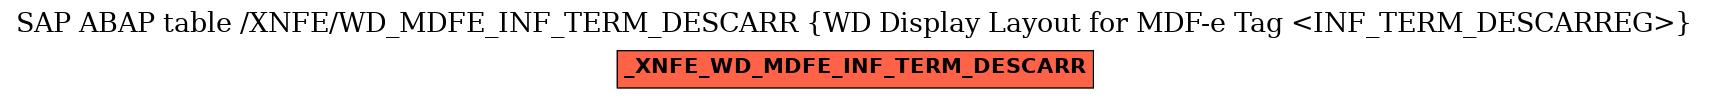 E-R Diagram for table /XNFE/WD_MDFE_INF_TERM_DESCARR (WD Display Layout for MDF-e Tag <INF_TERM_DESCARREG>)